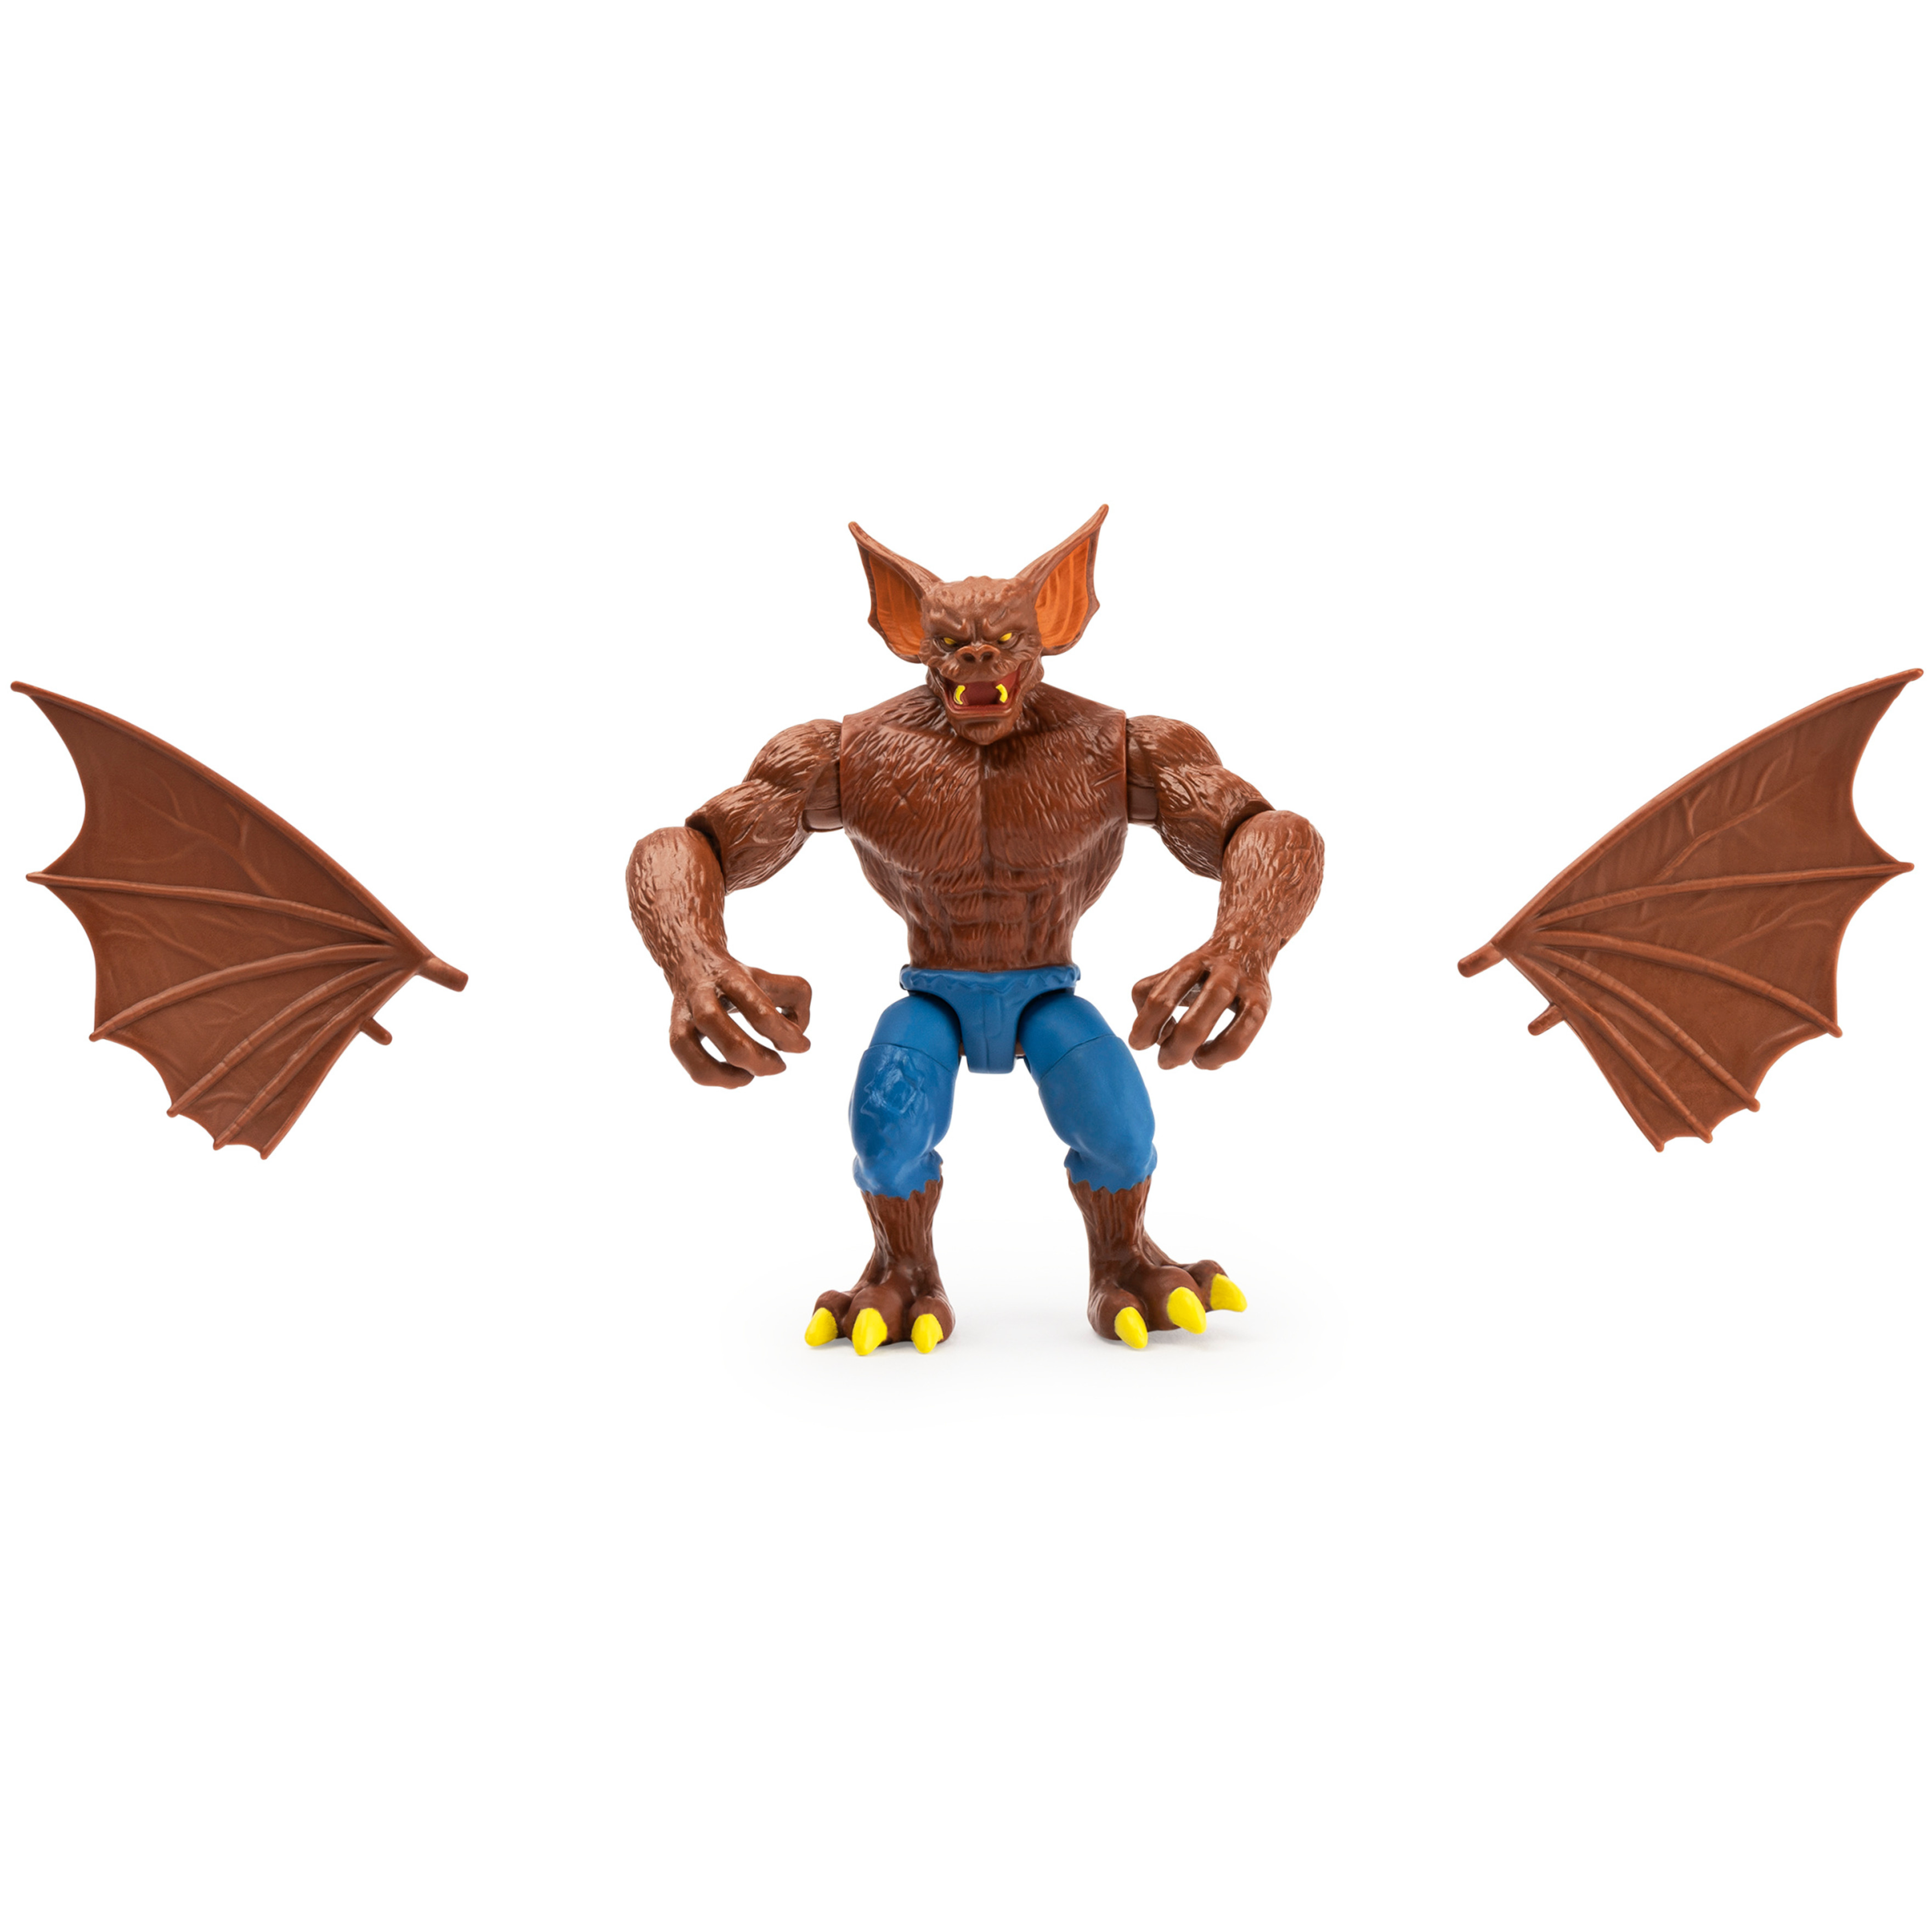 Batman, 4-inch Man-Bat Action Figure with 3 Mystery Accessories, Mission 4 - image 5 of 7